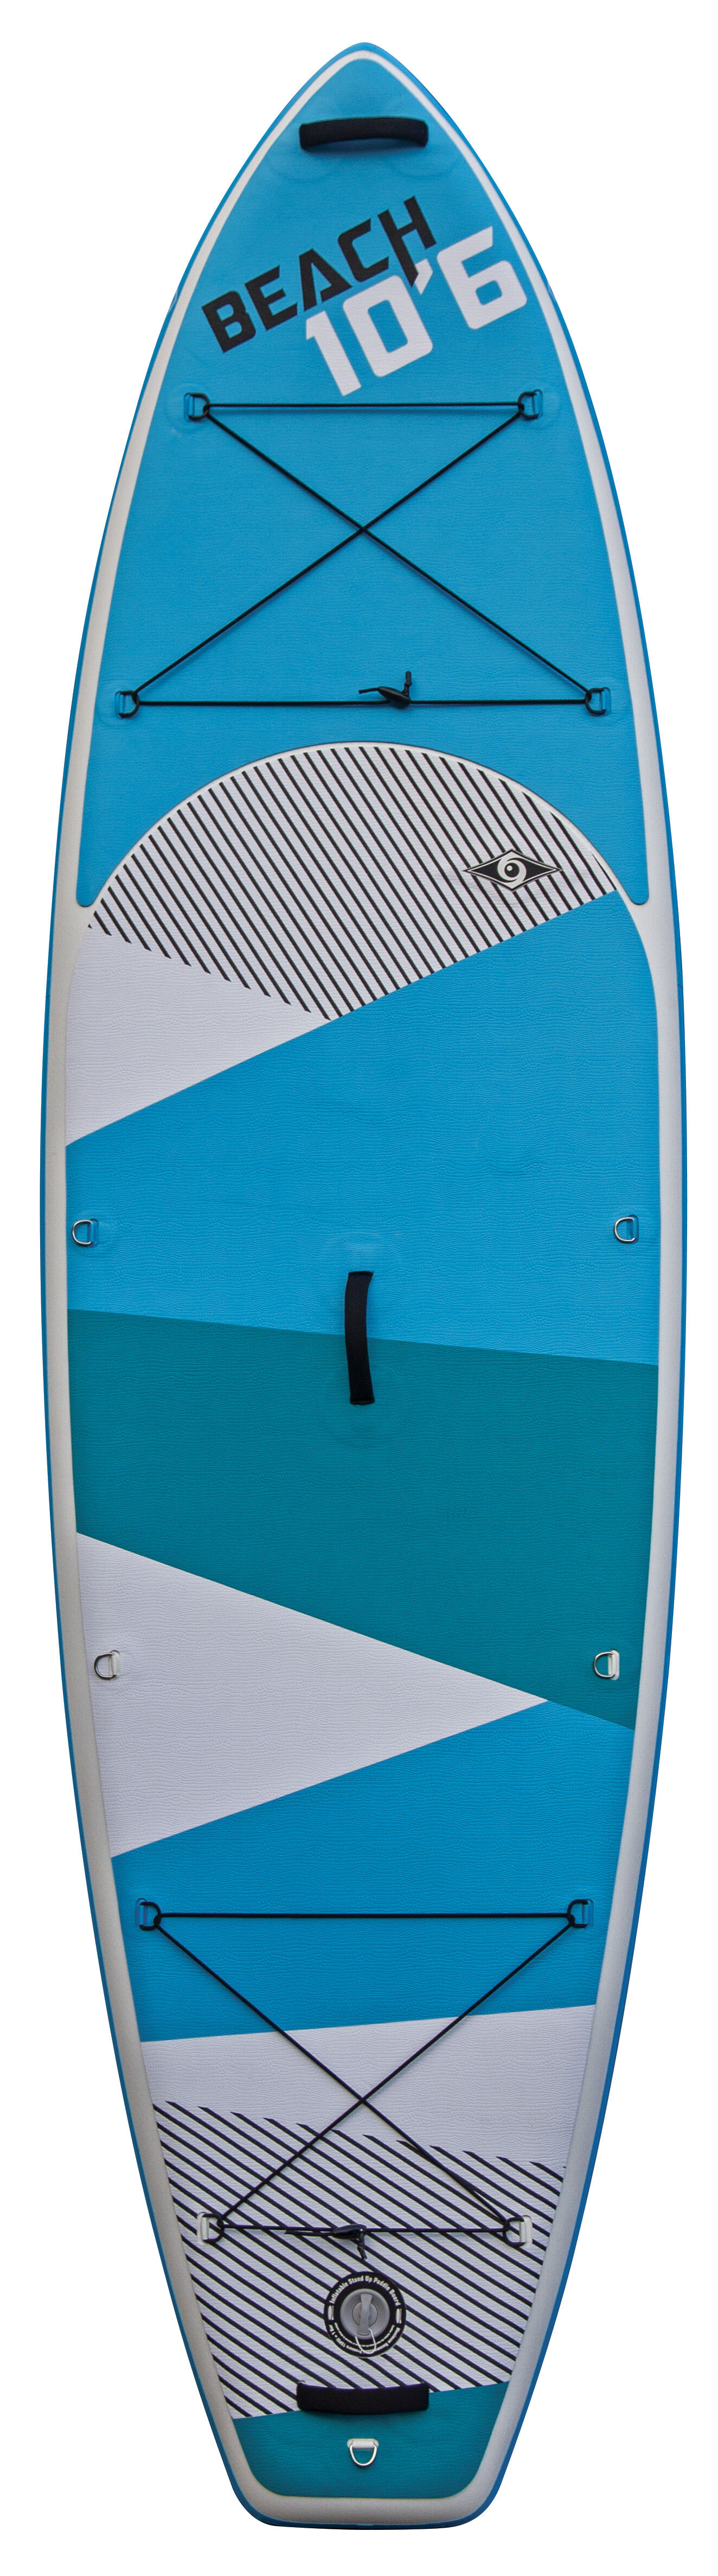 Tahe Outdoor 10'6 Sup Air Beach Pack - Uppblåsbar Stand Up Paddle